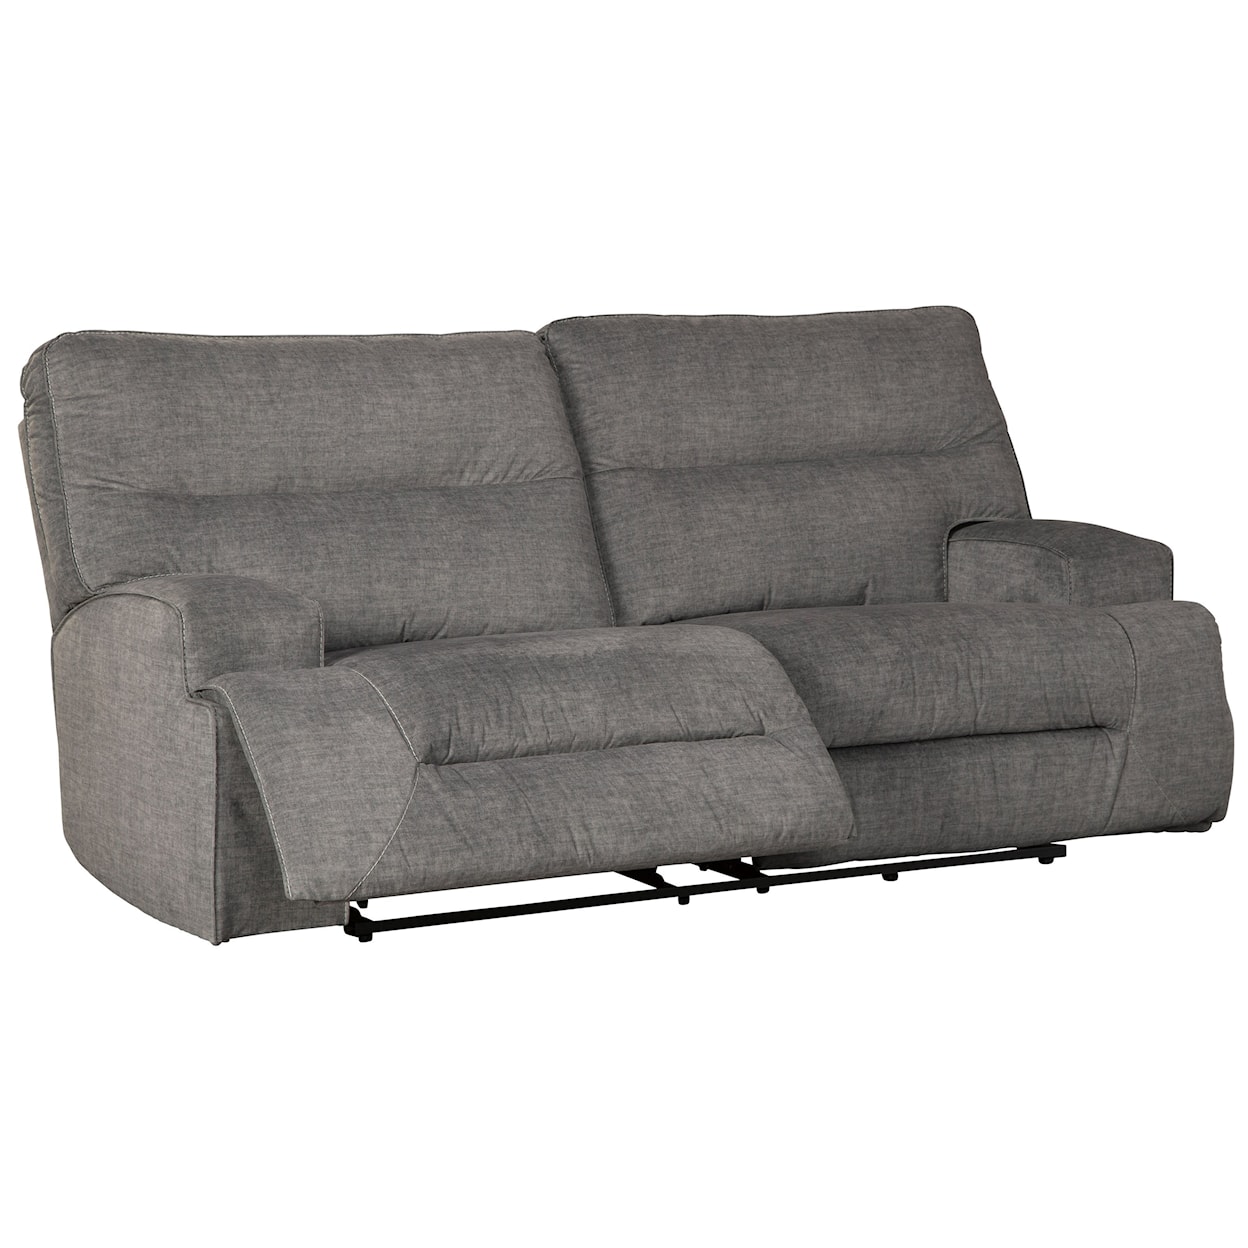 Benchcraft Coombs 2-Seat Reclining Sofa